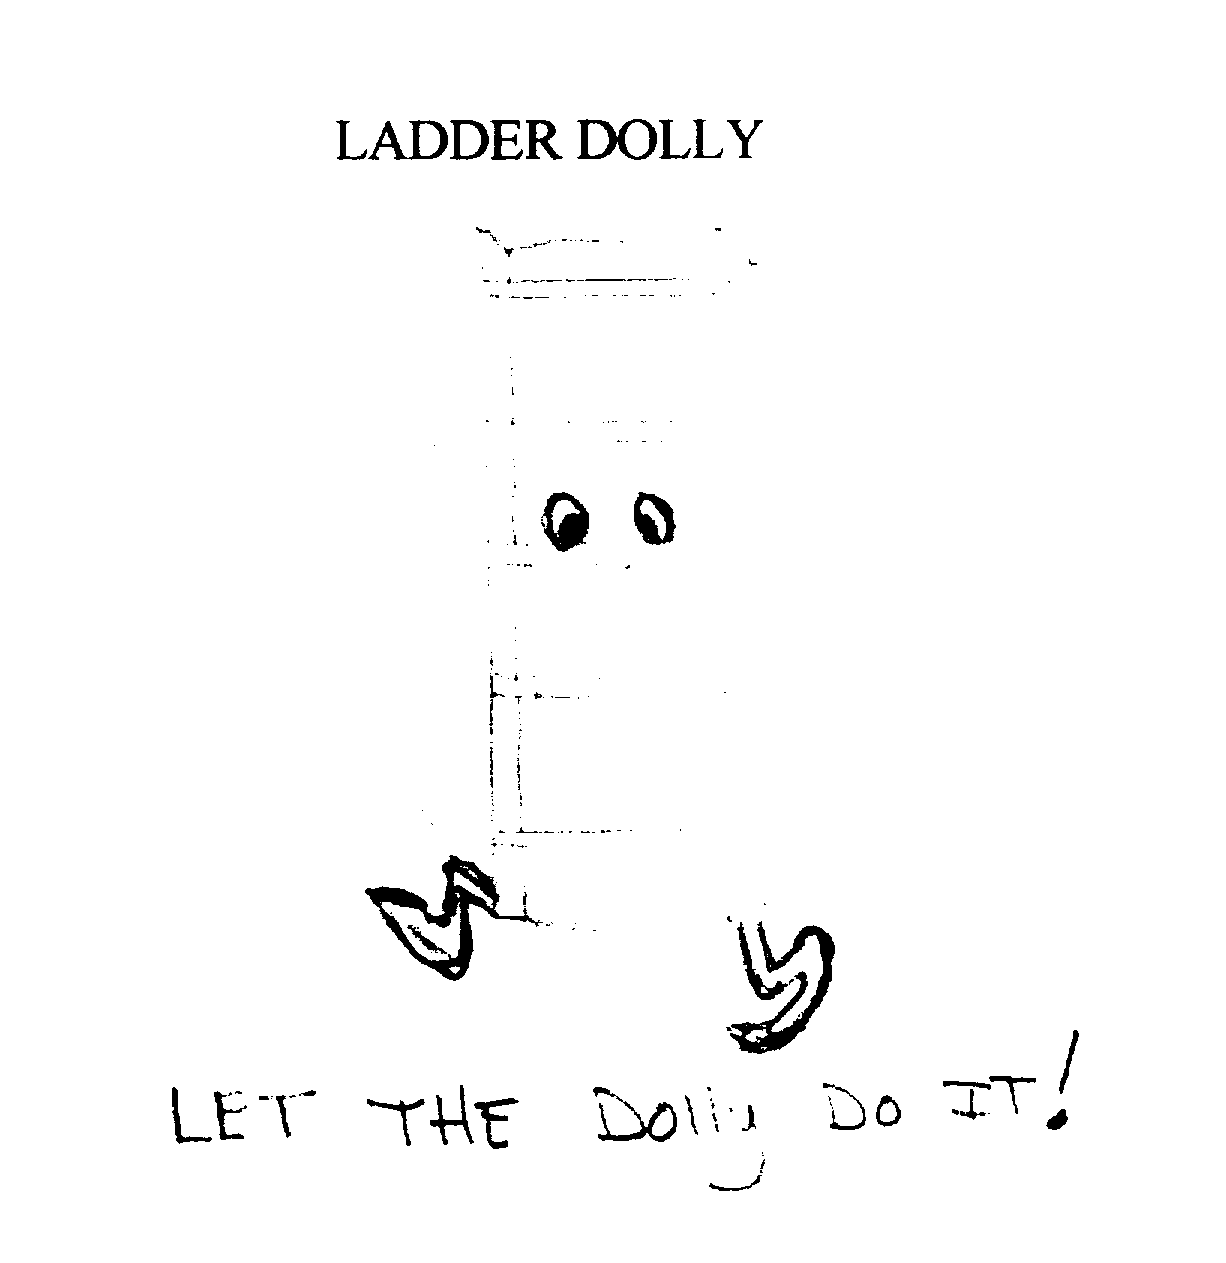  LADDER DOLLY LET THE DOLLY DO IT!